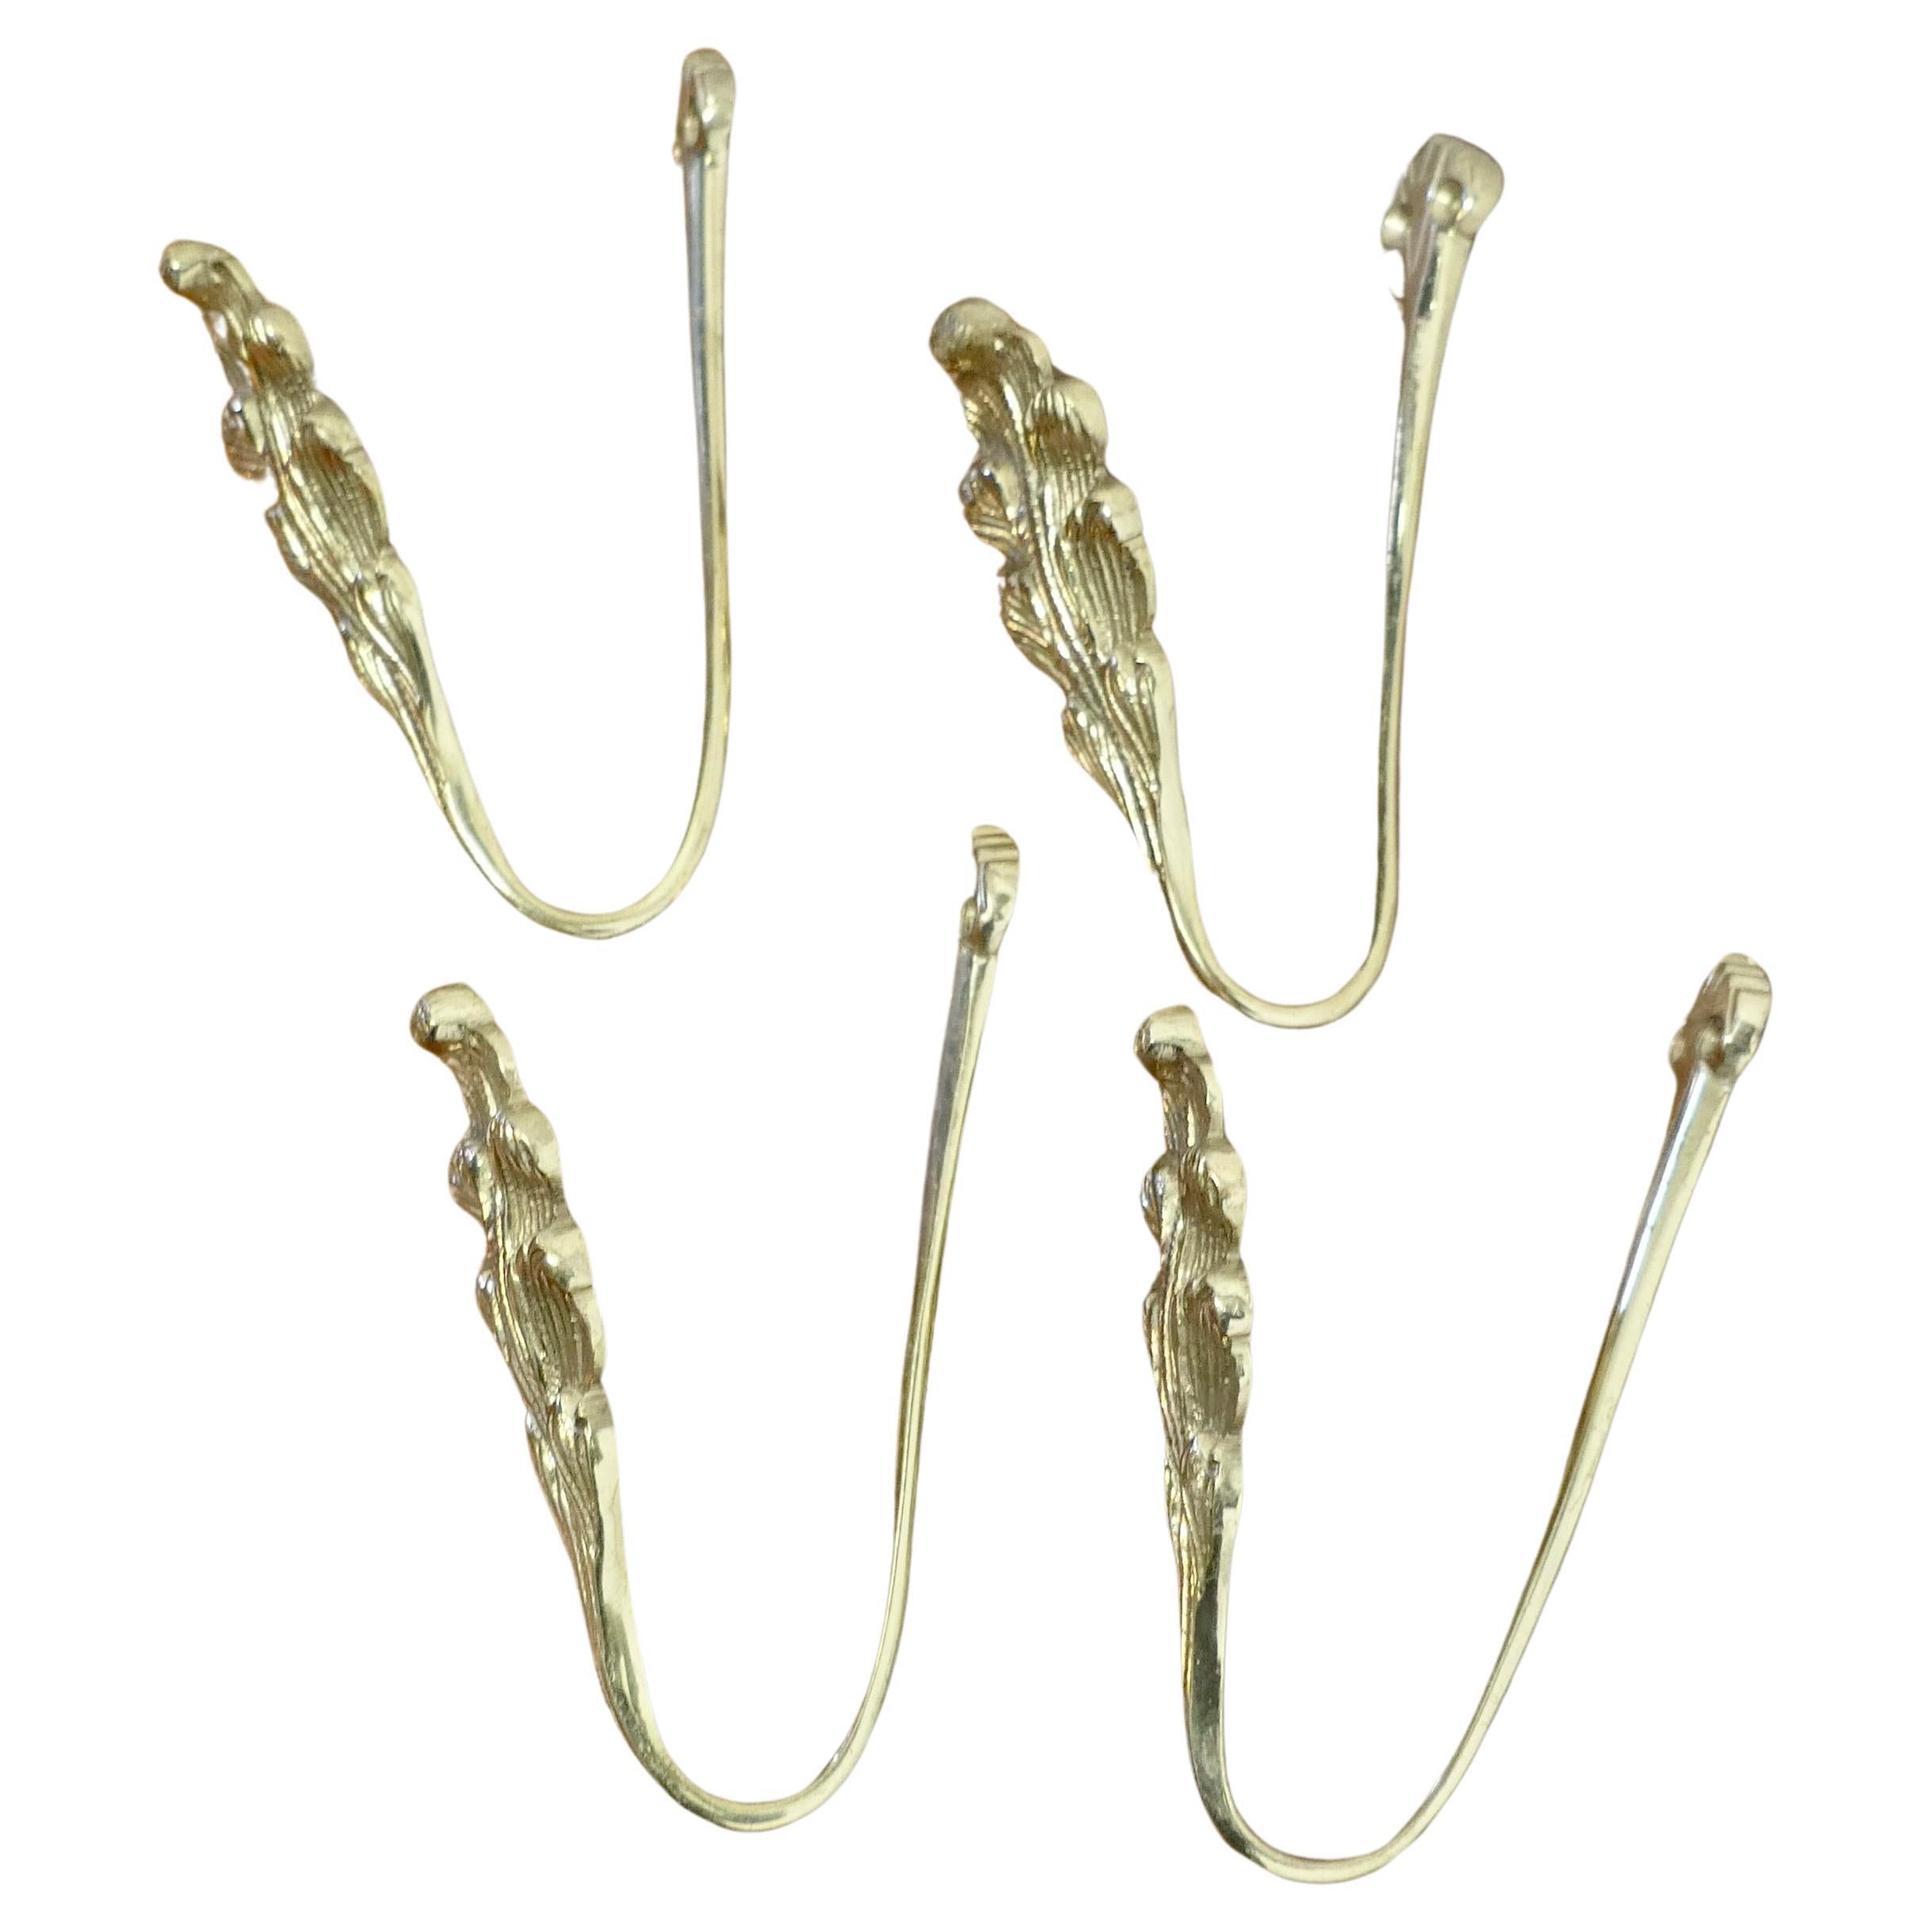 2 Matching Pairs of French Brass Curtain Tie Backs      For Sale